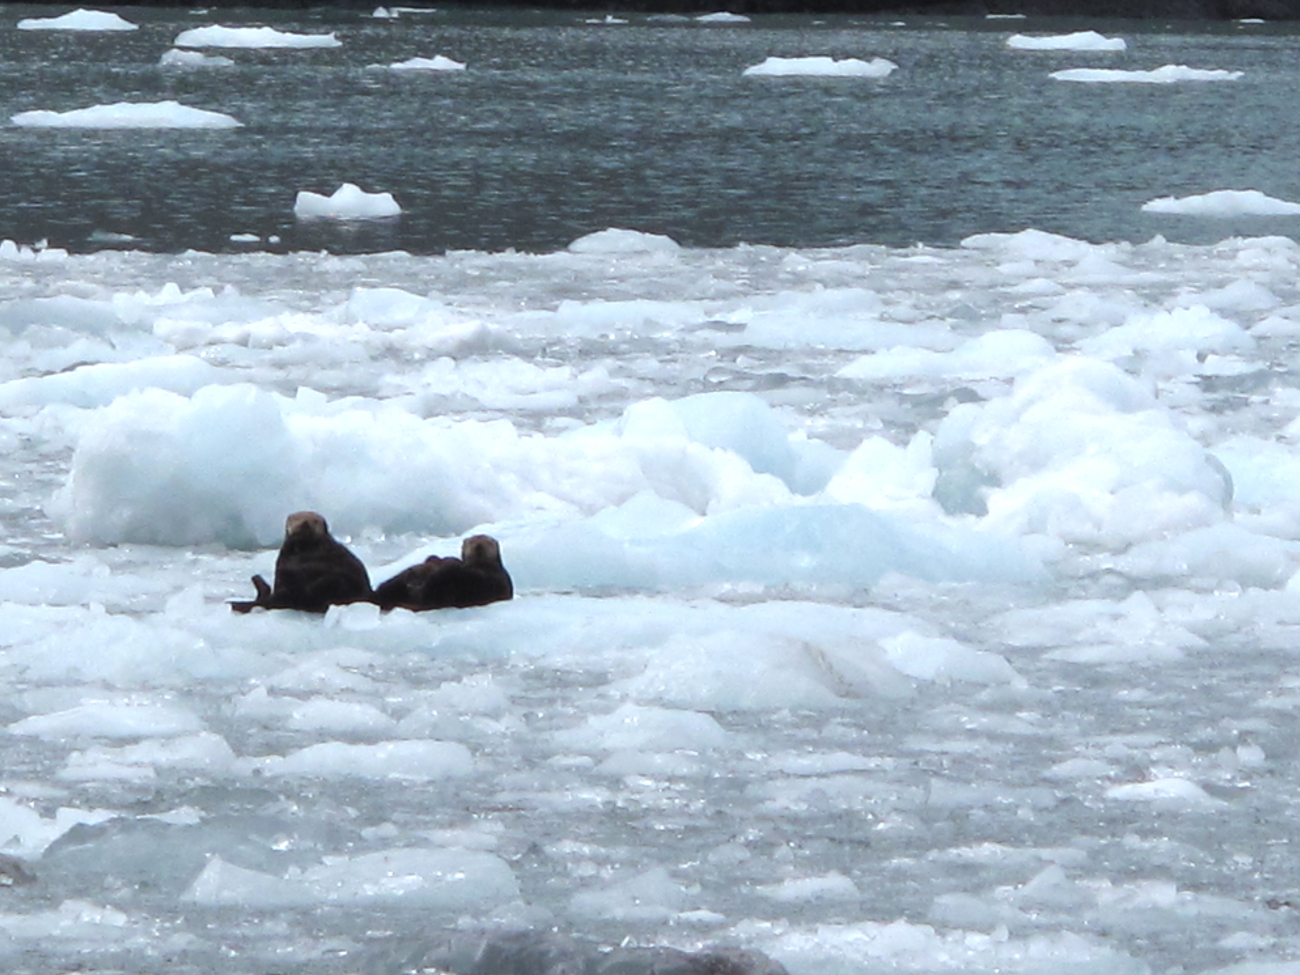 Sea otter family on the ice